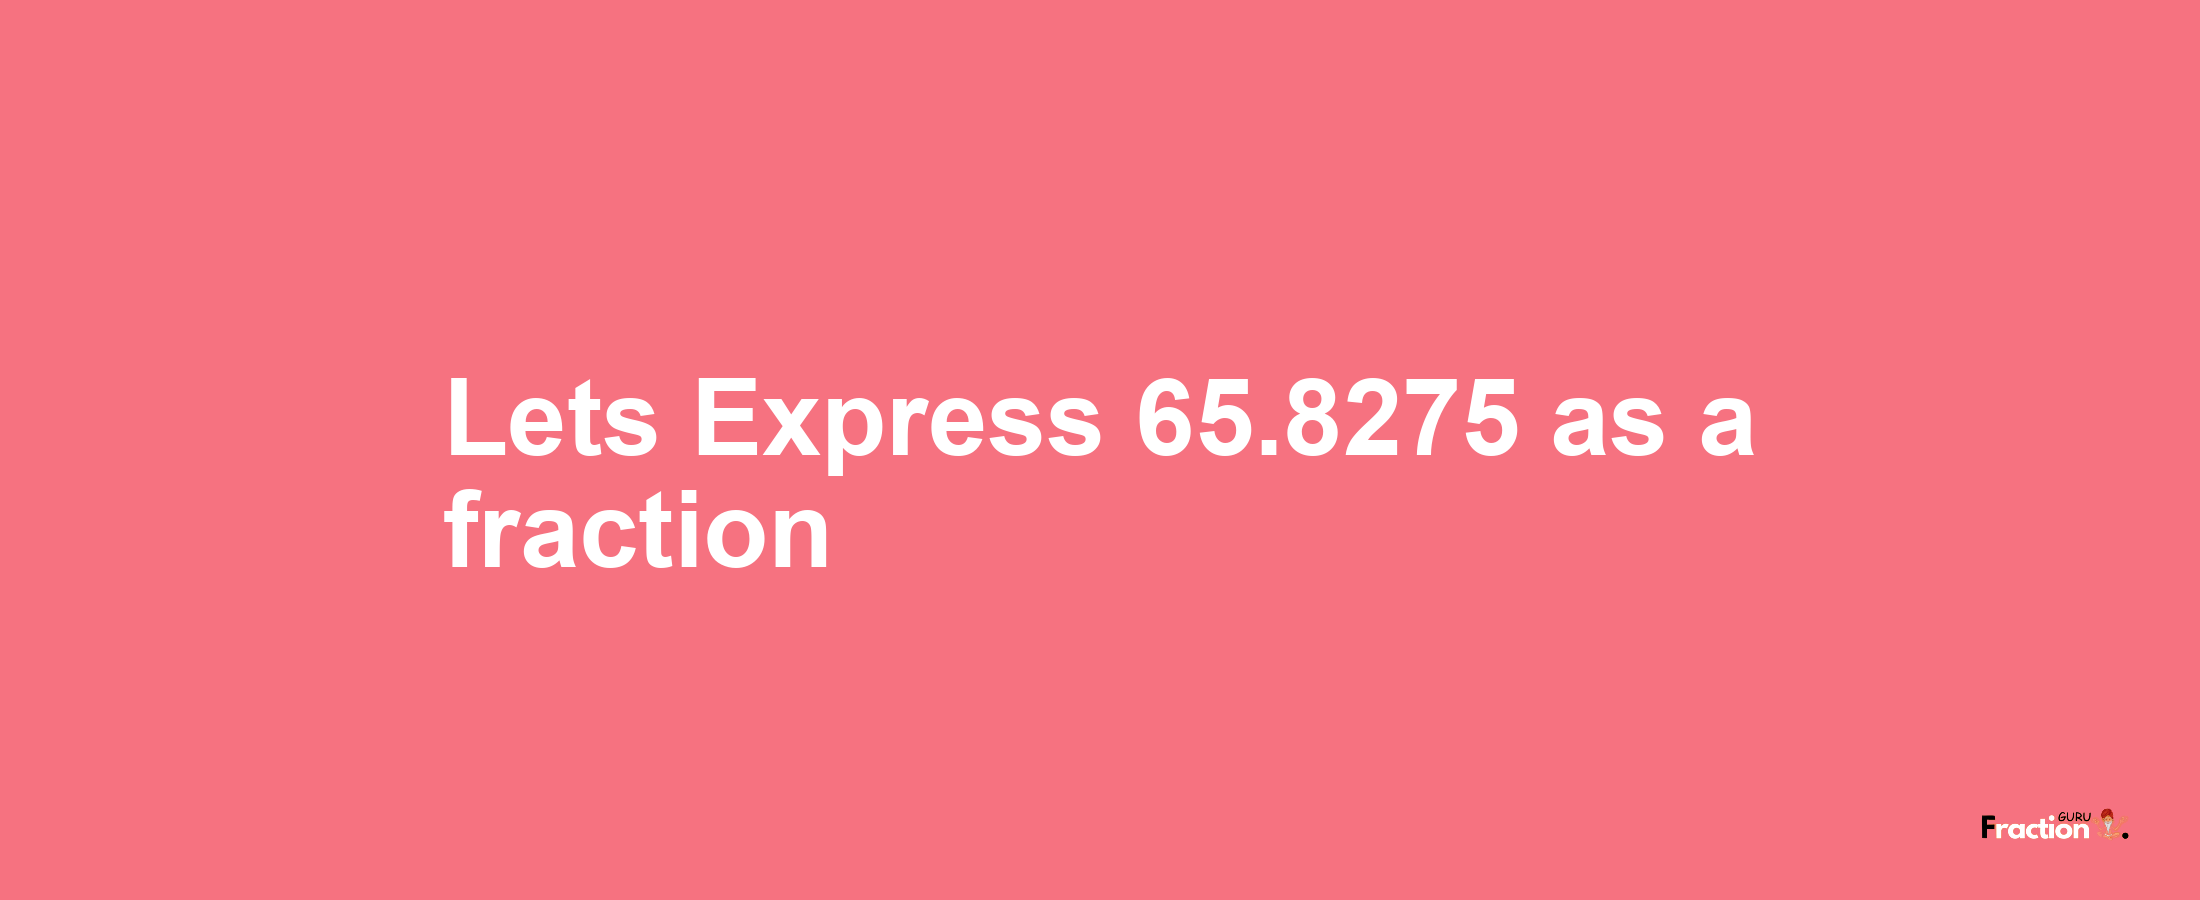 Lets Express 65.8275 as afraction